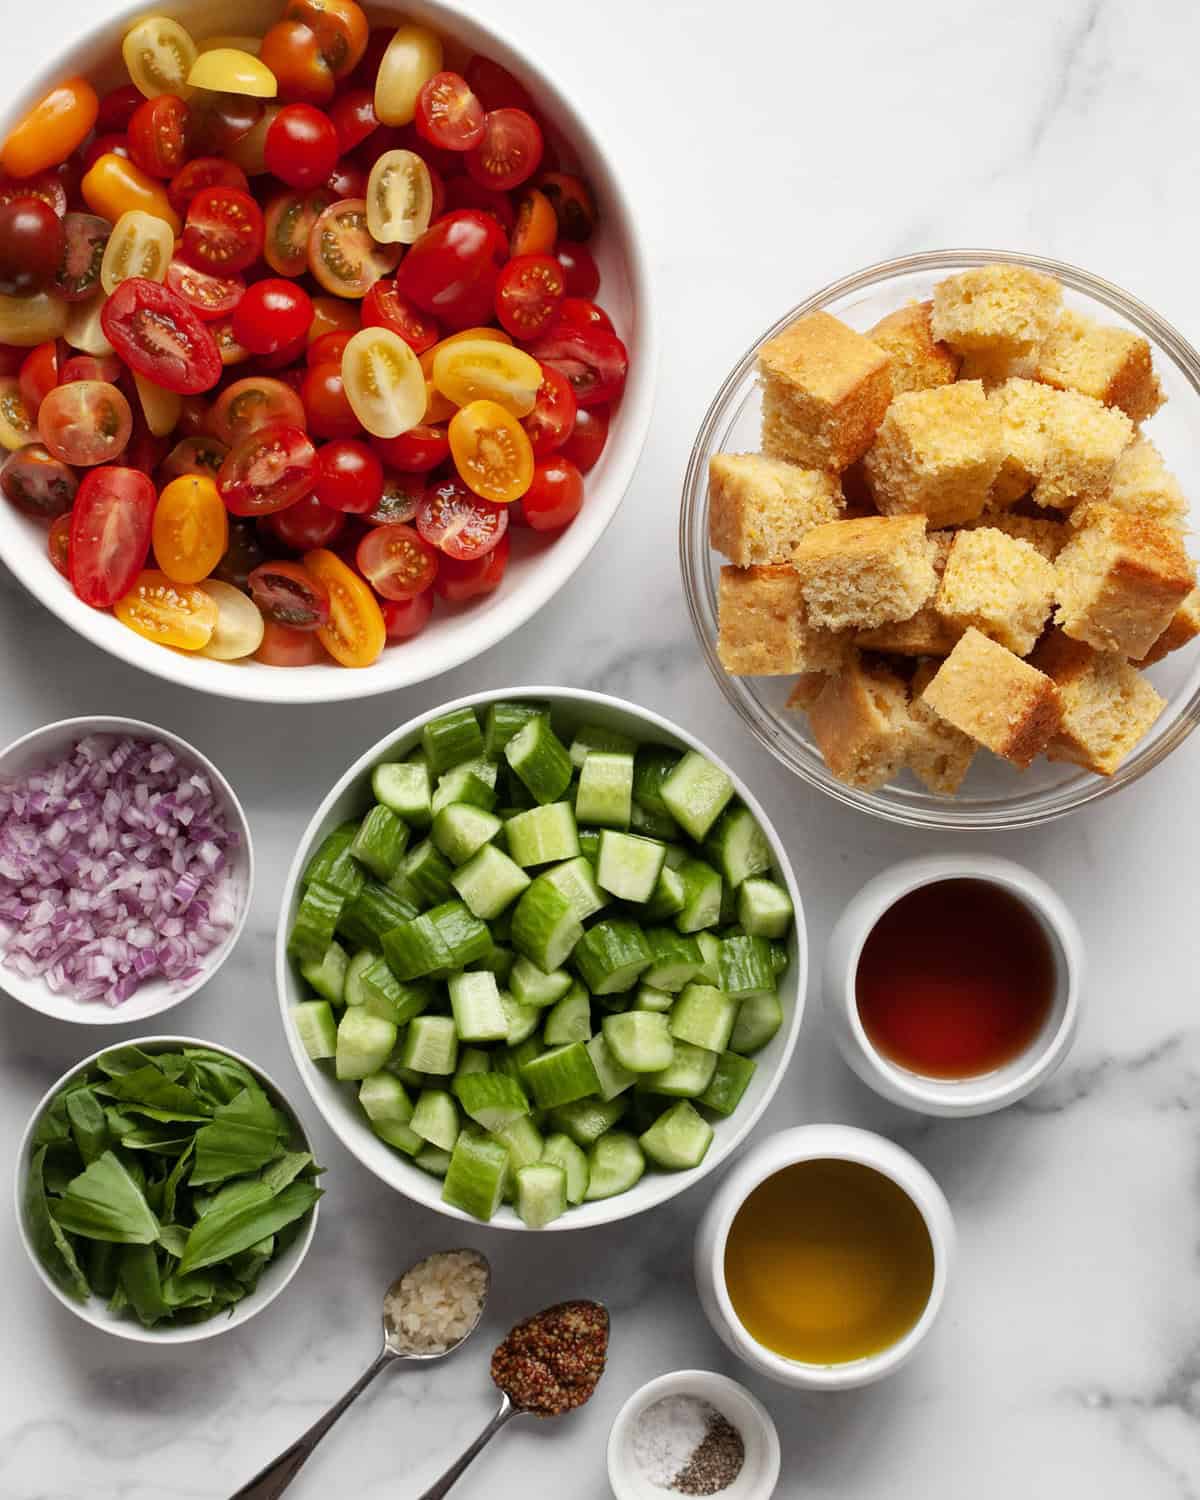 Ingredients for salad including cornbread cubes, tomatoes, cucumbers,bers, red onions, basil, vinegar, oil, mustard, garlic, salt and pepper.